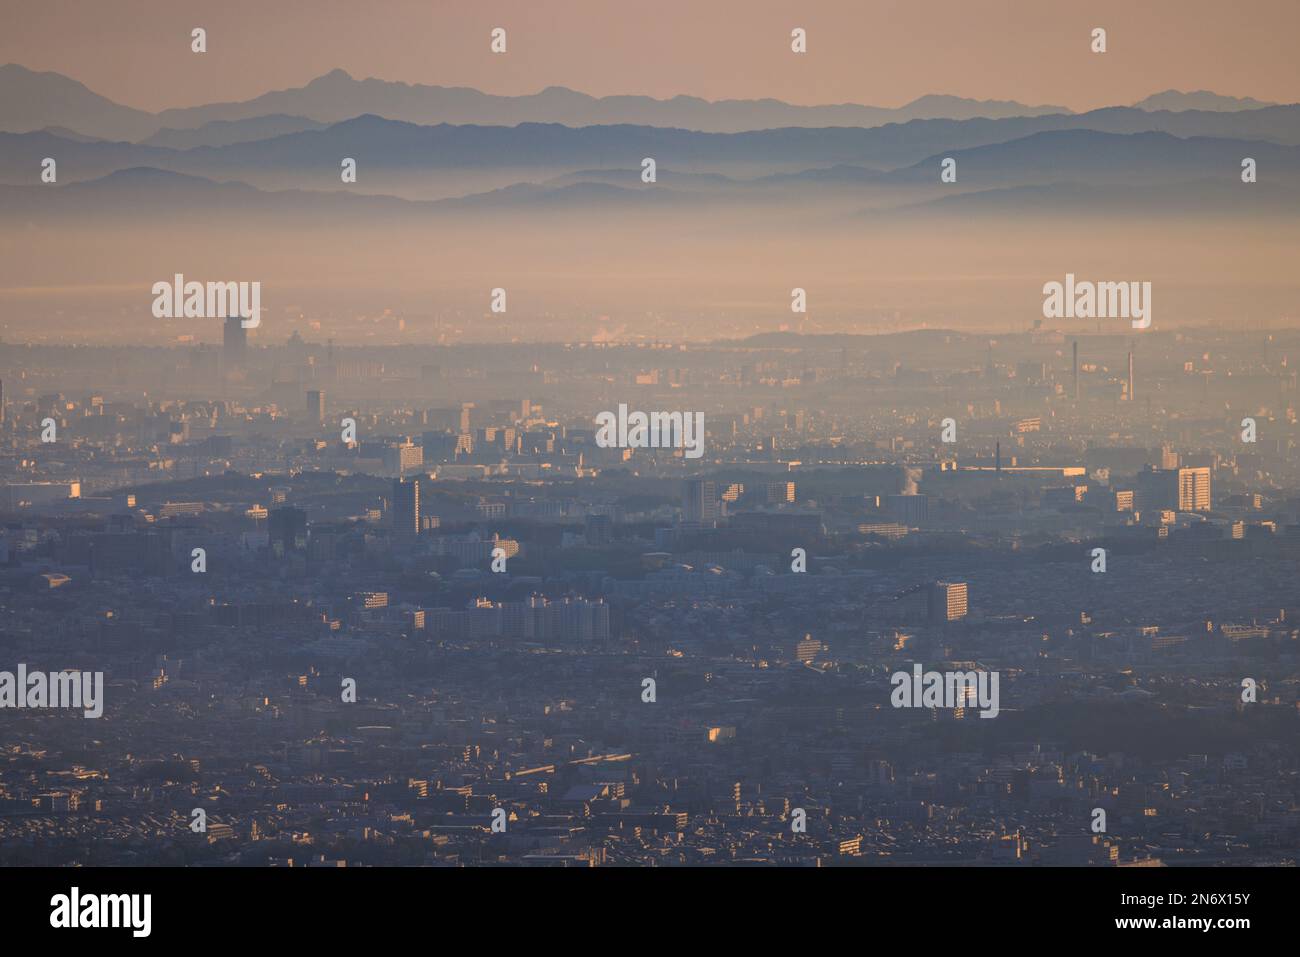 Sprawling city blends with smog layer and distant mountains at sunrise Stock Photo